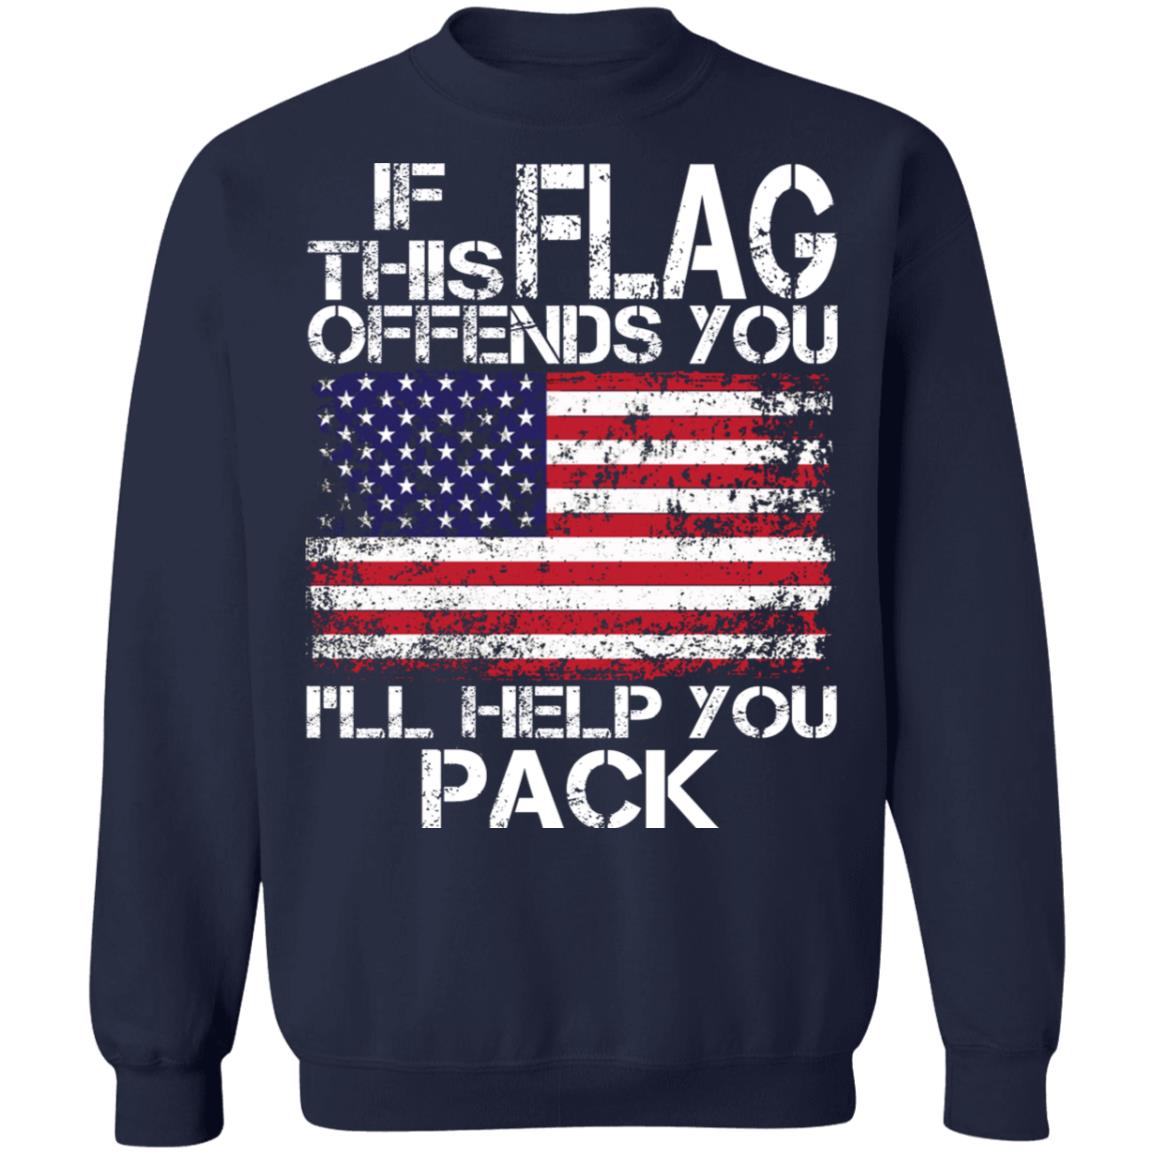 If This Flag Offends You I'll Help You Pack Shirt - Allbluetees ...